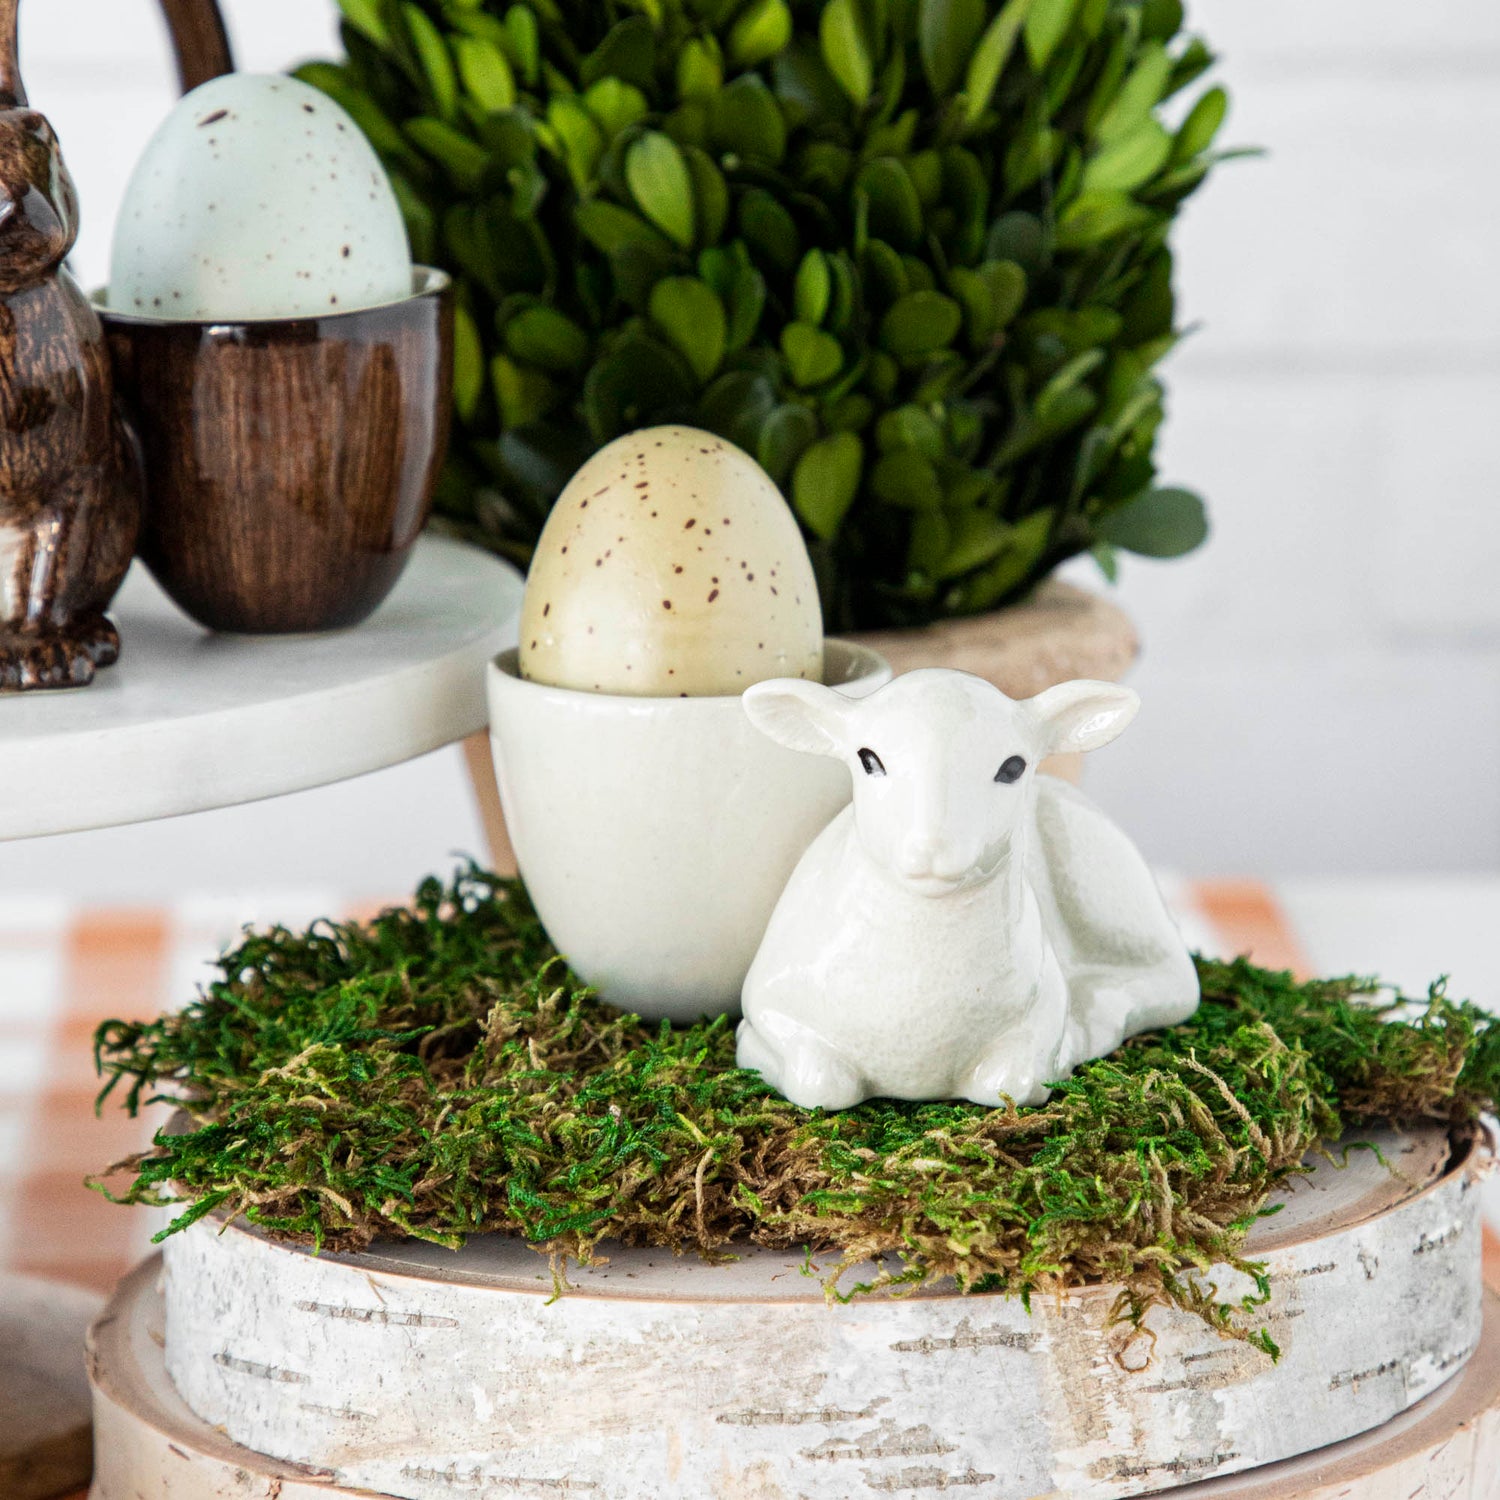 Add a touch of whimsy to your Easter table with quirky Farm Animal Ceramics from Quail. This British brand offers charming sheep figurines, vibrant eggs, and lush moss for a festive centerpiece.